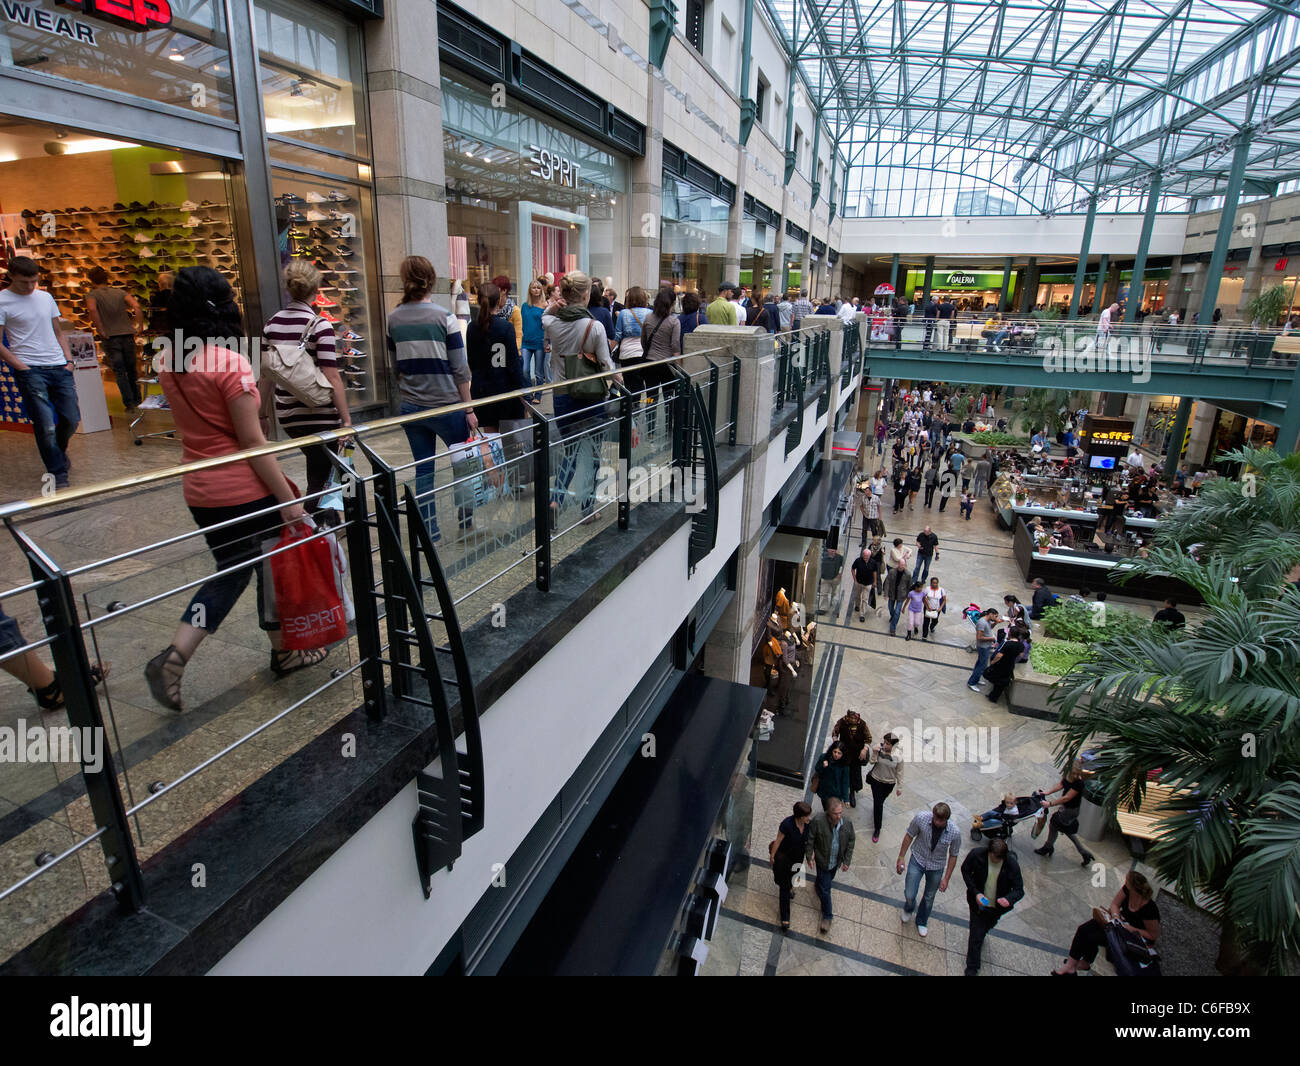 Interior of atrium in Centro one of Europe's largest shopping mall in Oberhausen Germany Stock Photo